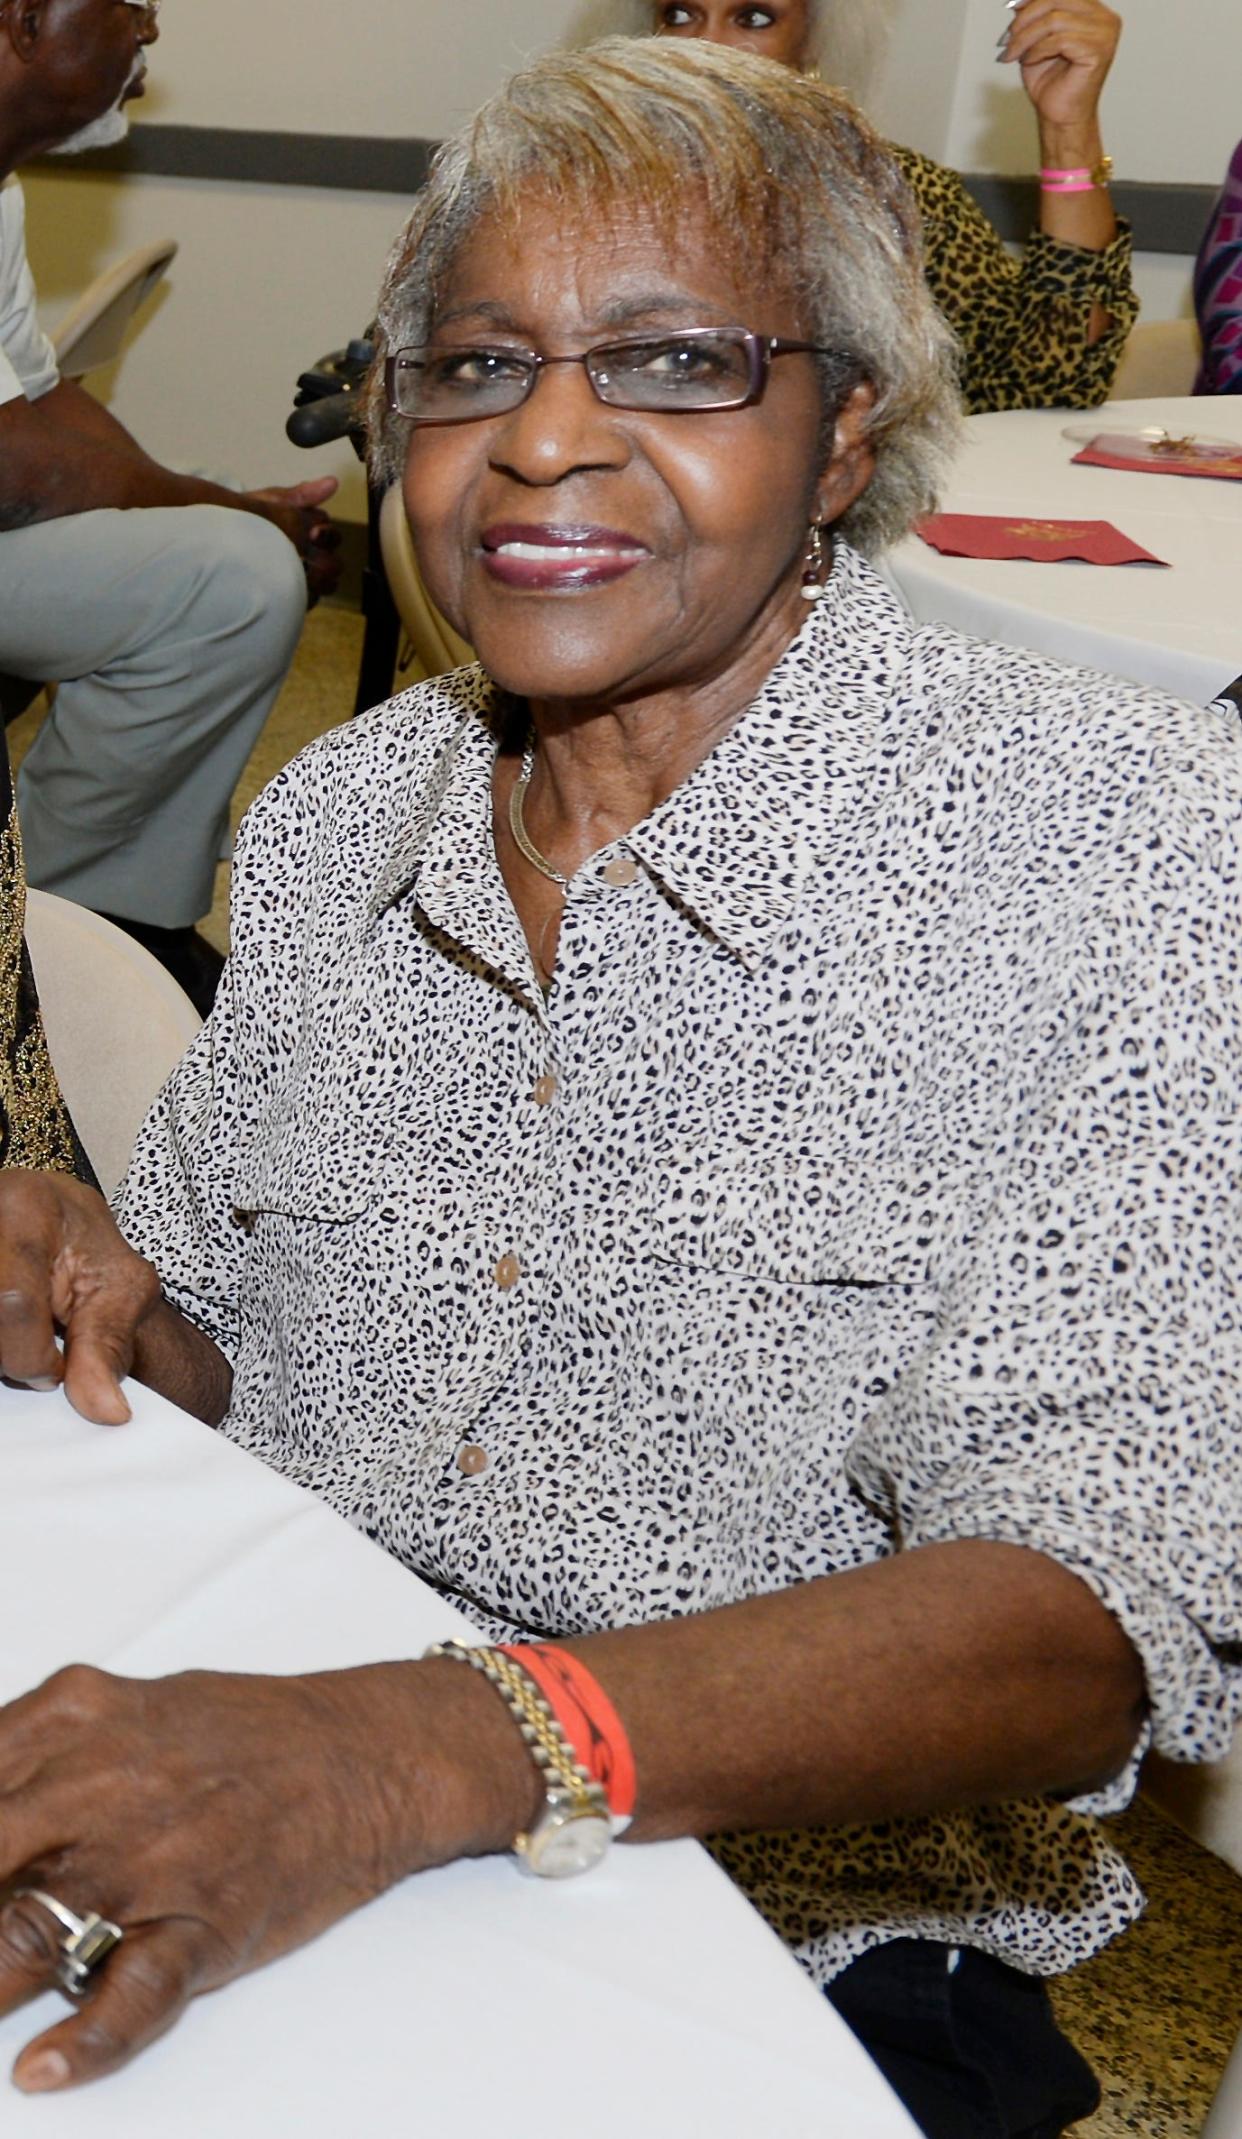 Evelyn Lawler Lewis is pictured during the 2014 Central-Carver Reunion in Gadsden. Lewis, a track and field athlete and coach and mother of track and field legends Carl and Carol Lewis, died Jan. 4.  